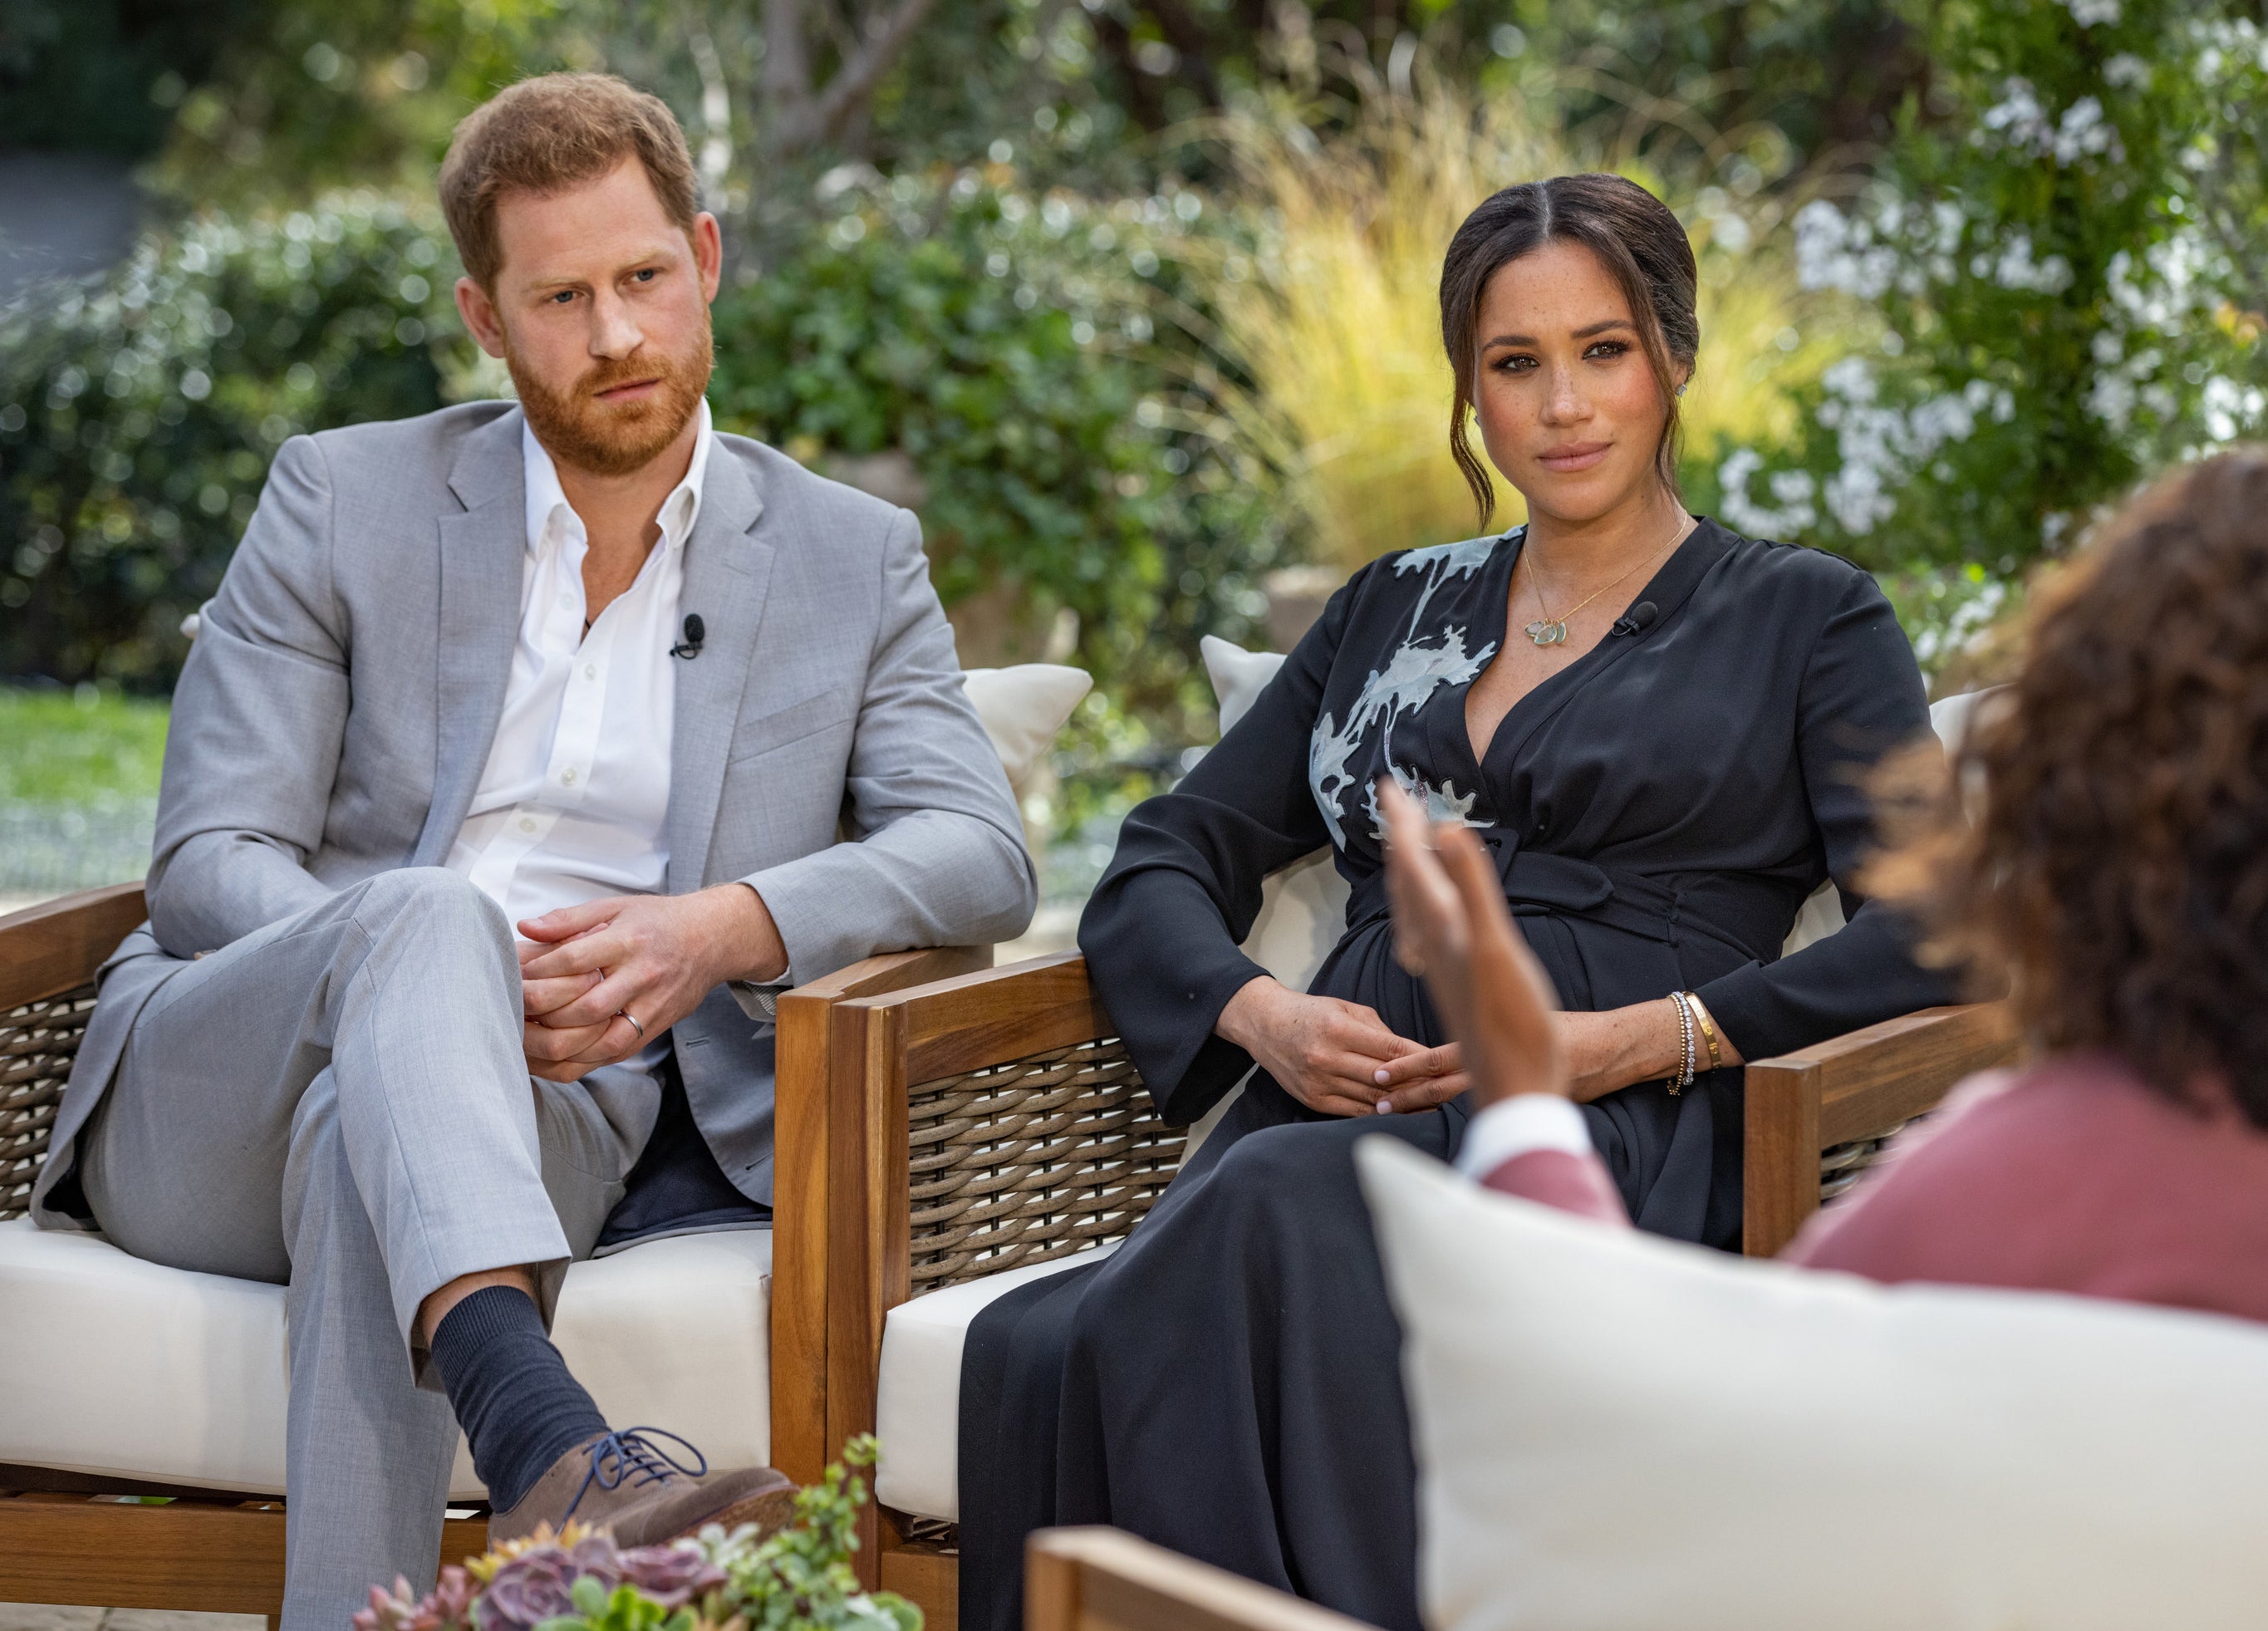 Harry and Meghan intently look at Oprah during the interview